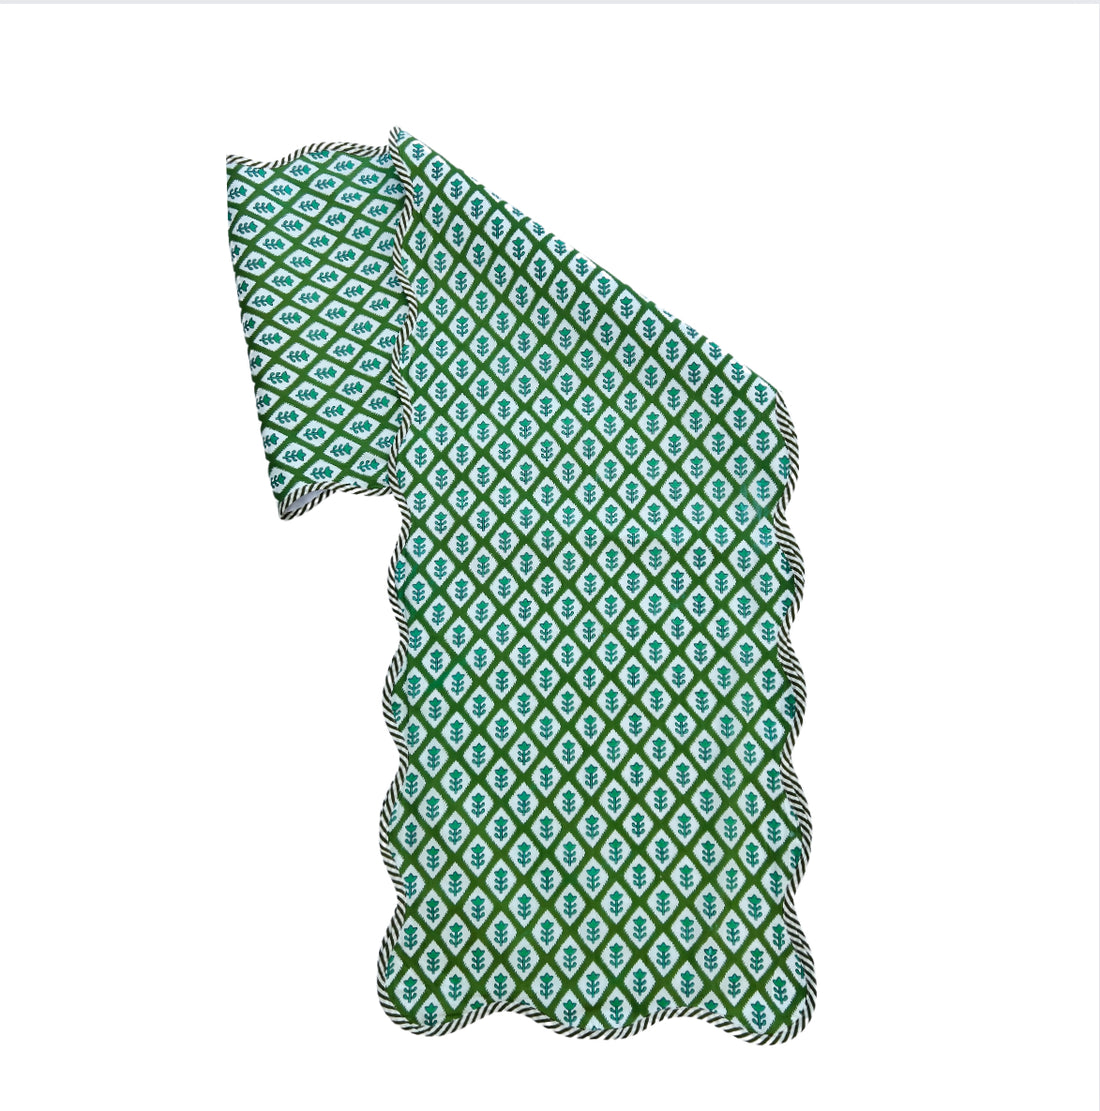 Green block print scalloped table runner with contrast piping